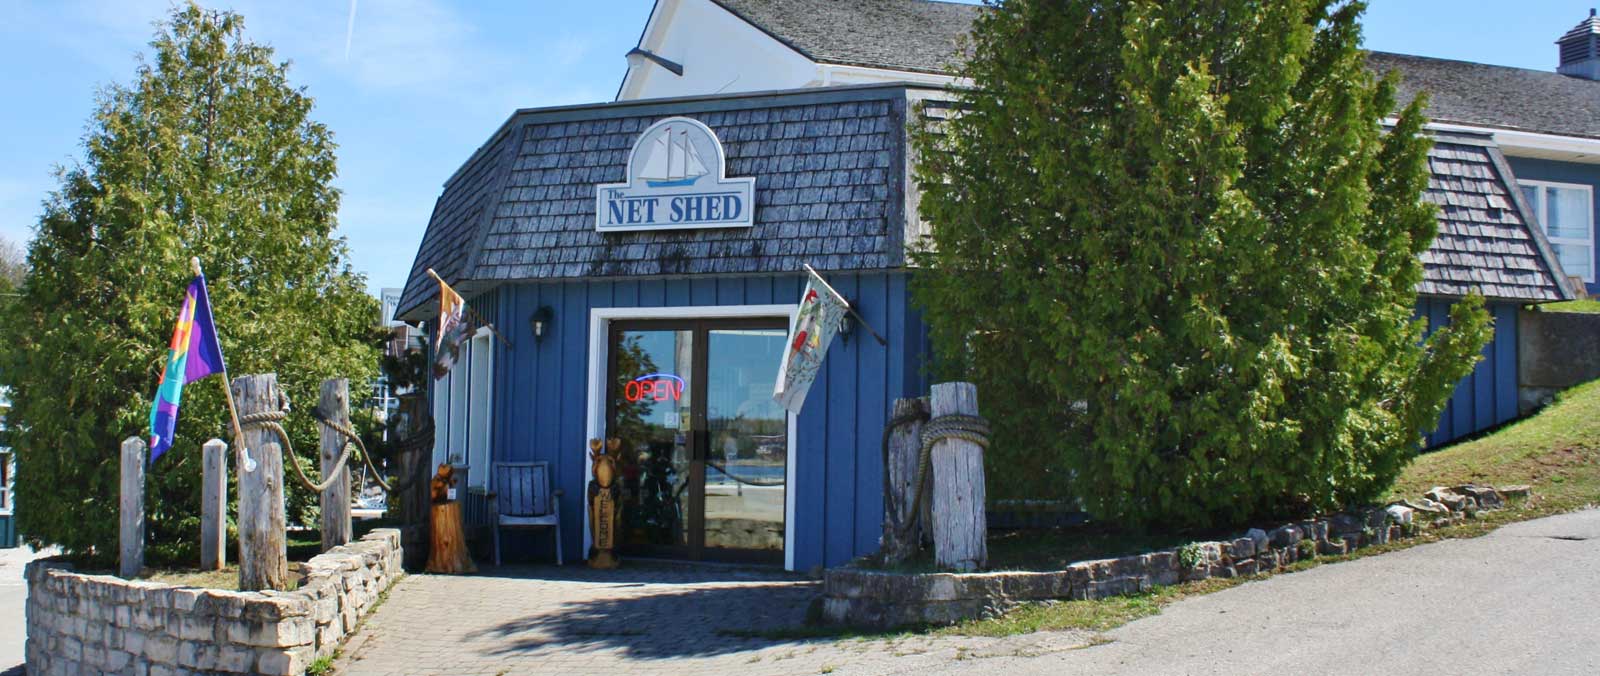  The Net Shed